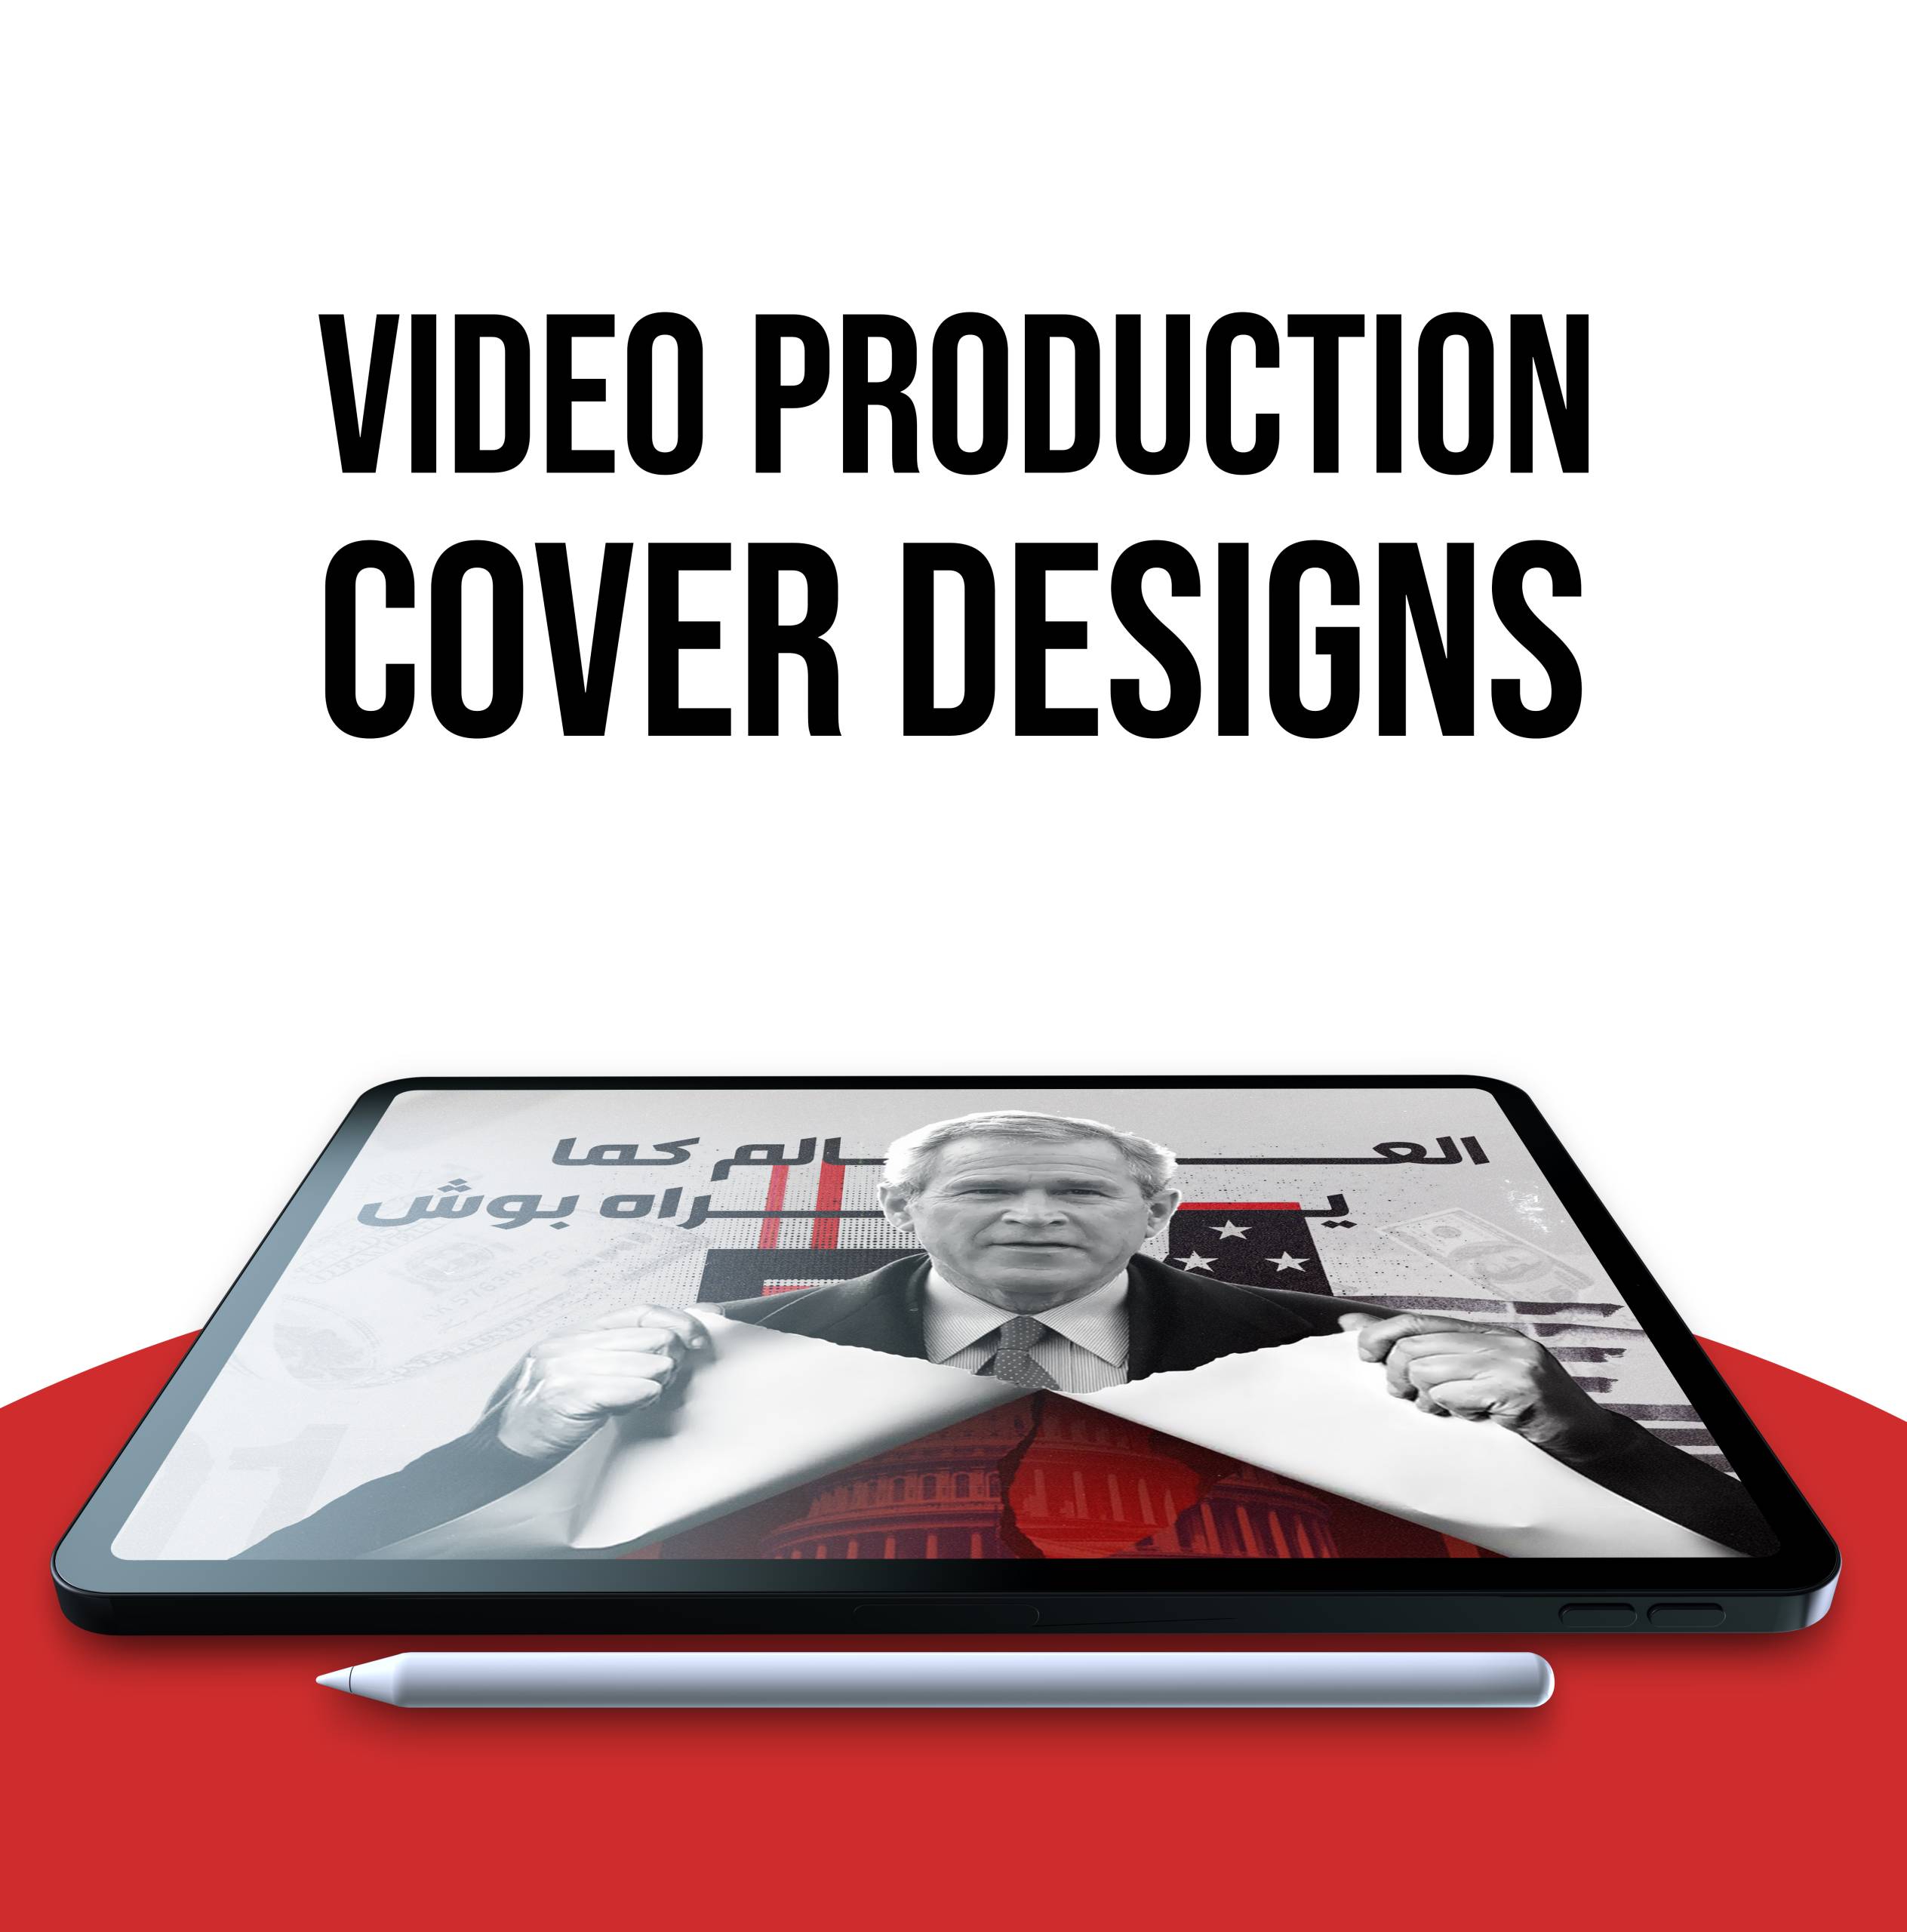 Video Production Cover Designs